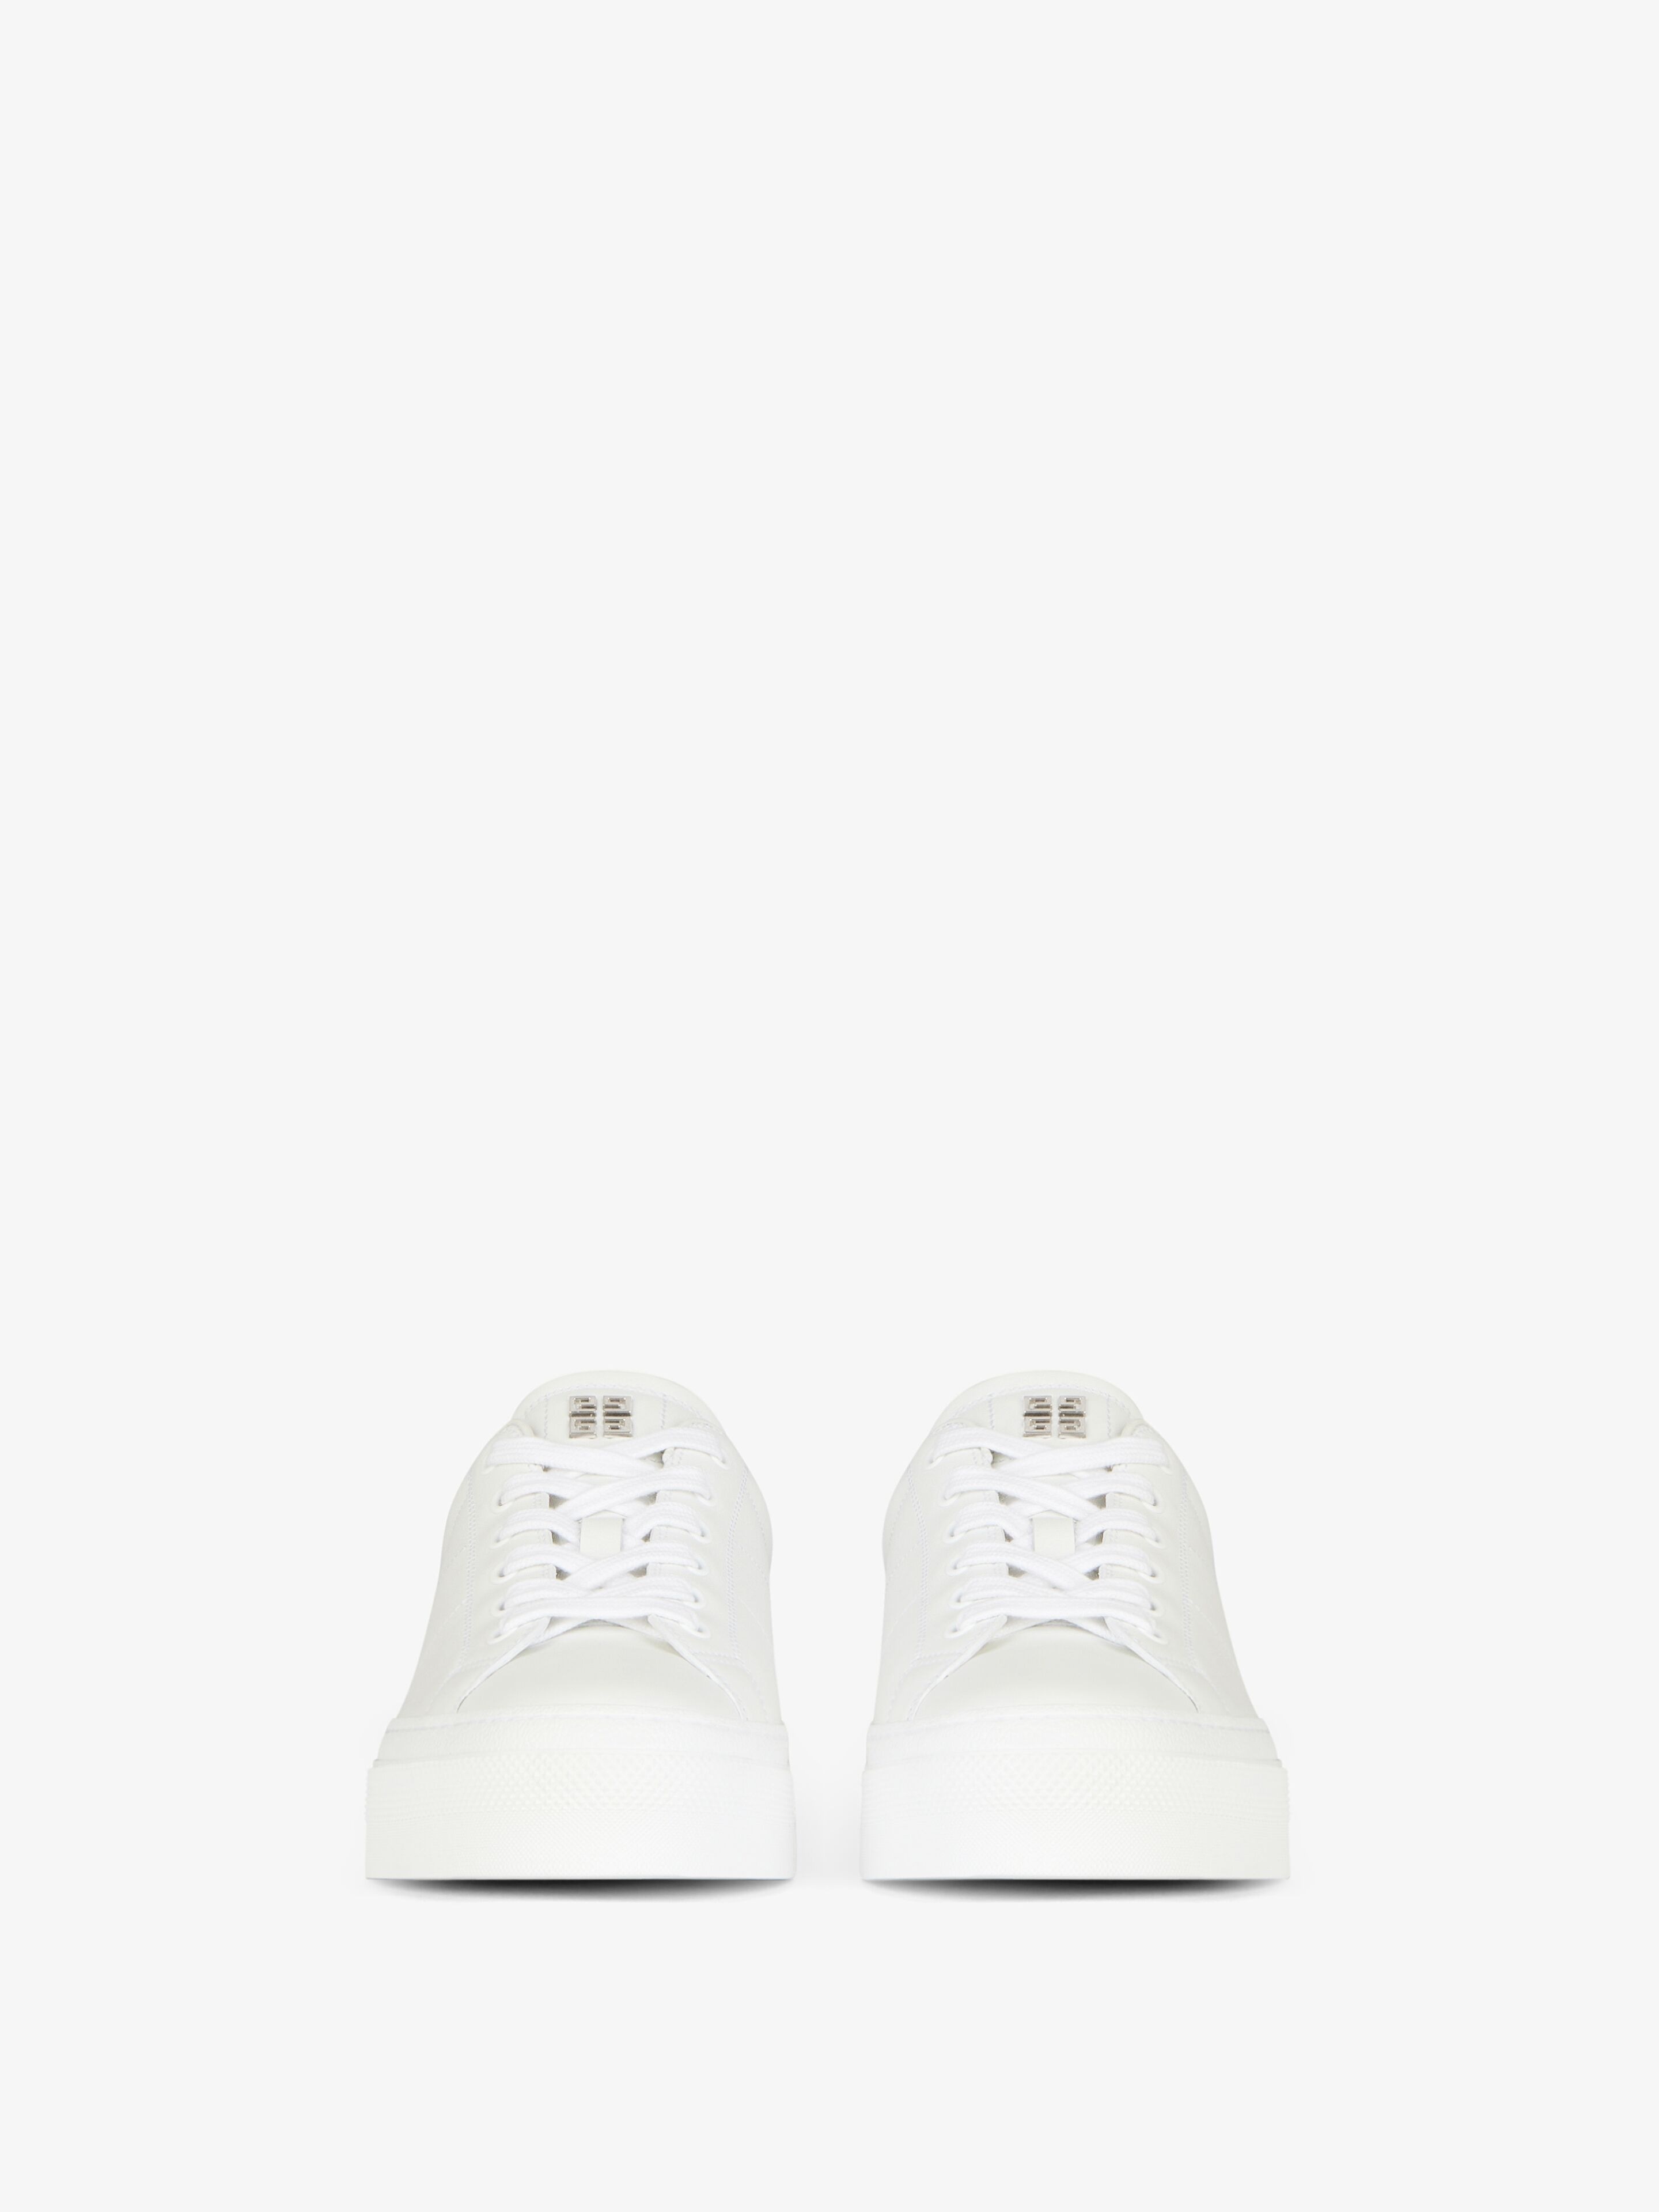 CITY SPORT SNEAKERS IN LEATHER WITH PRINTED GIVENCHY LOGO - 2